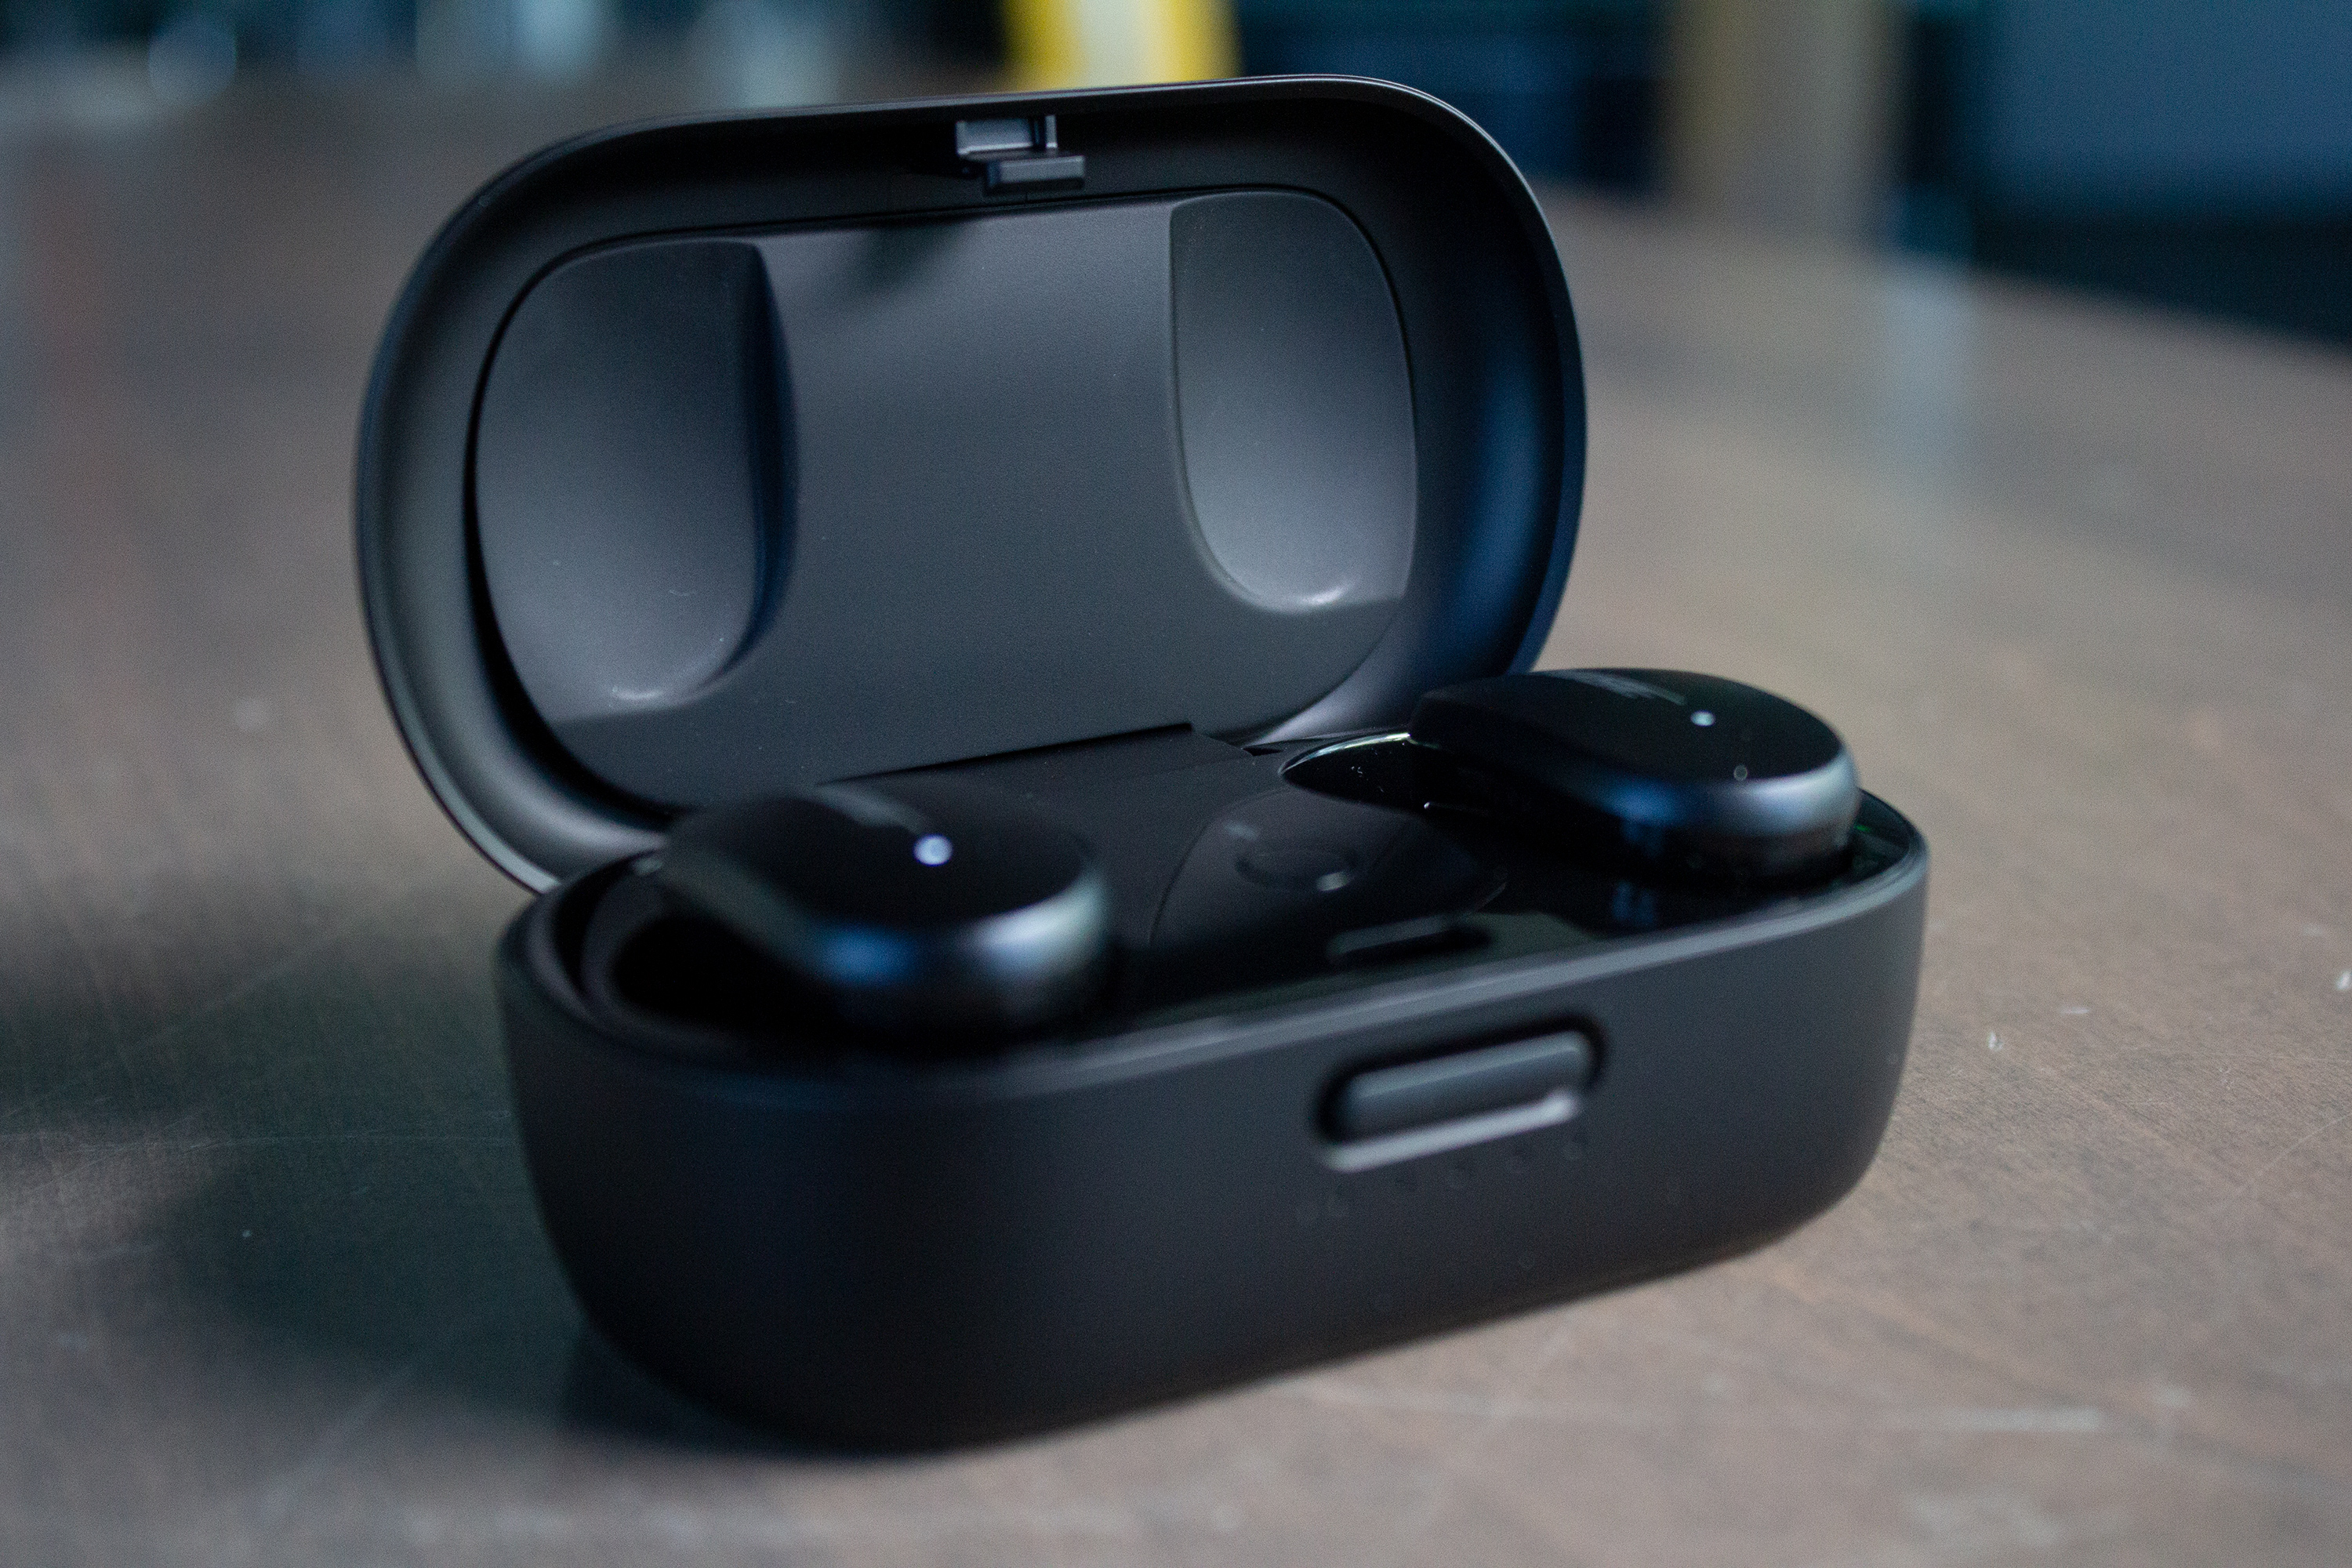 Bose QuietComfort Earbuds in their charging case on a table